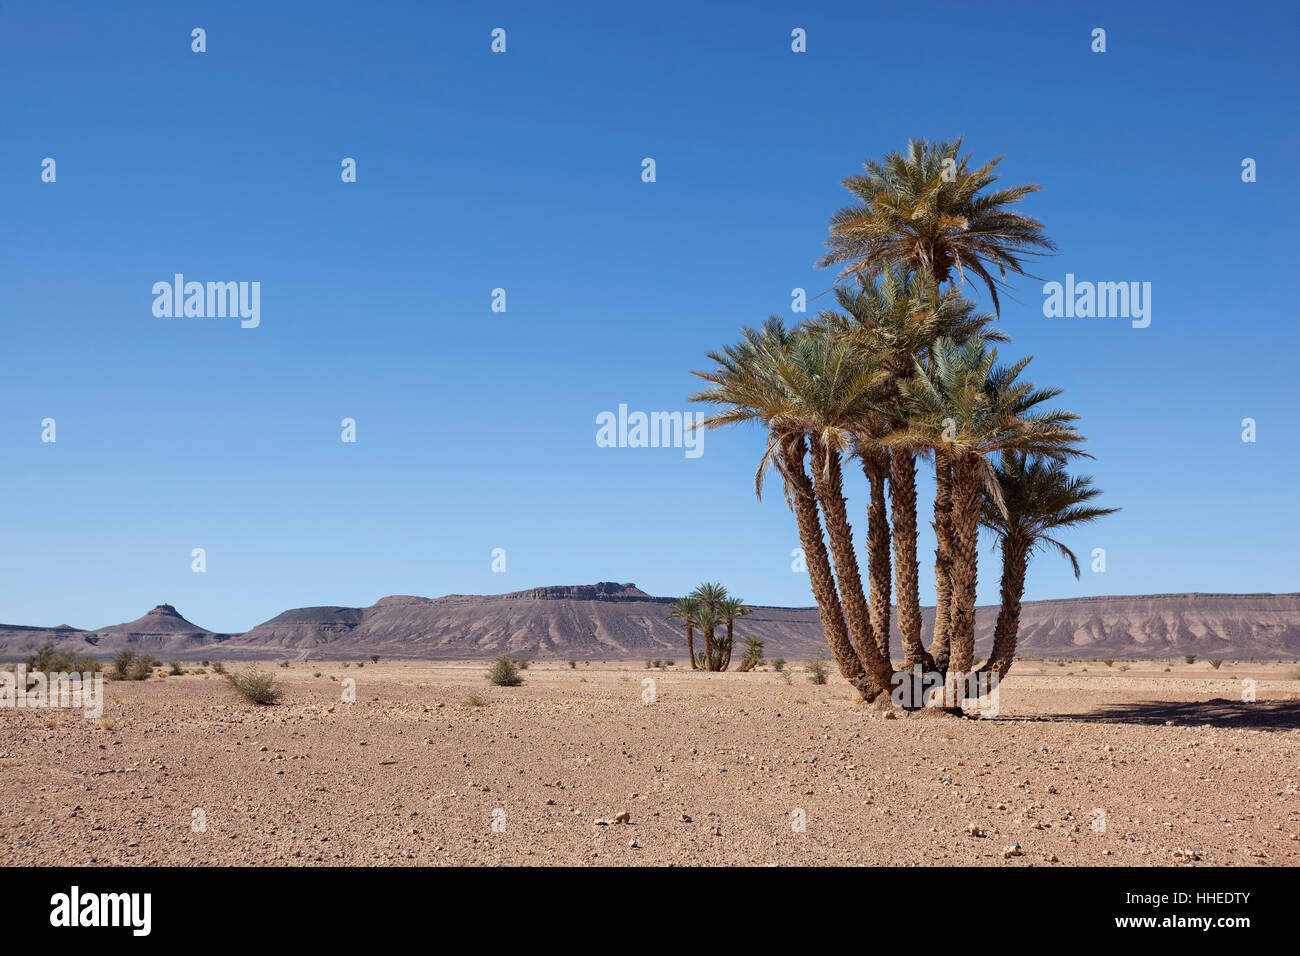 desert, wasteland, dry, dried up, barren, morocco, nature, landscapes, natural, Stock Photo